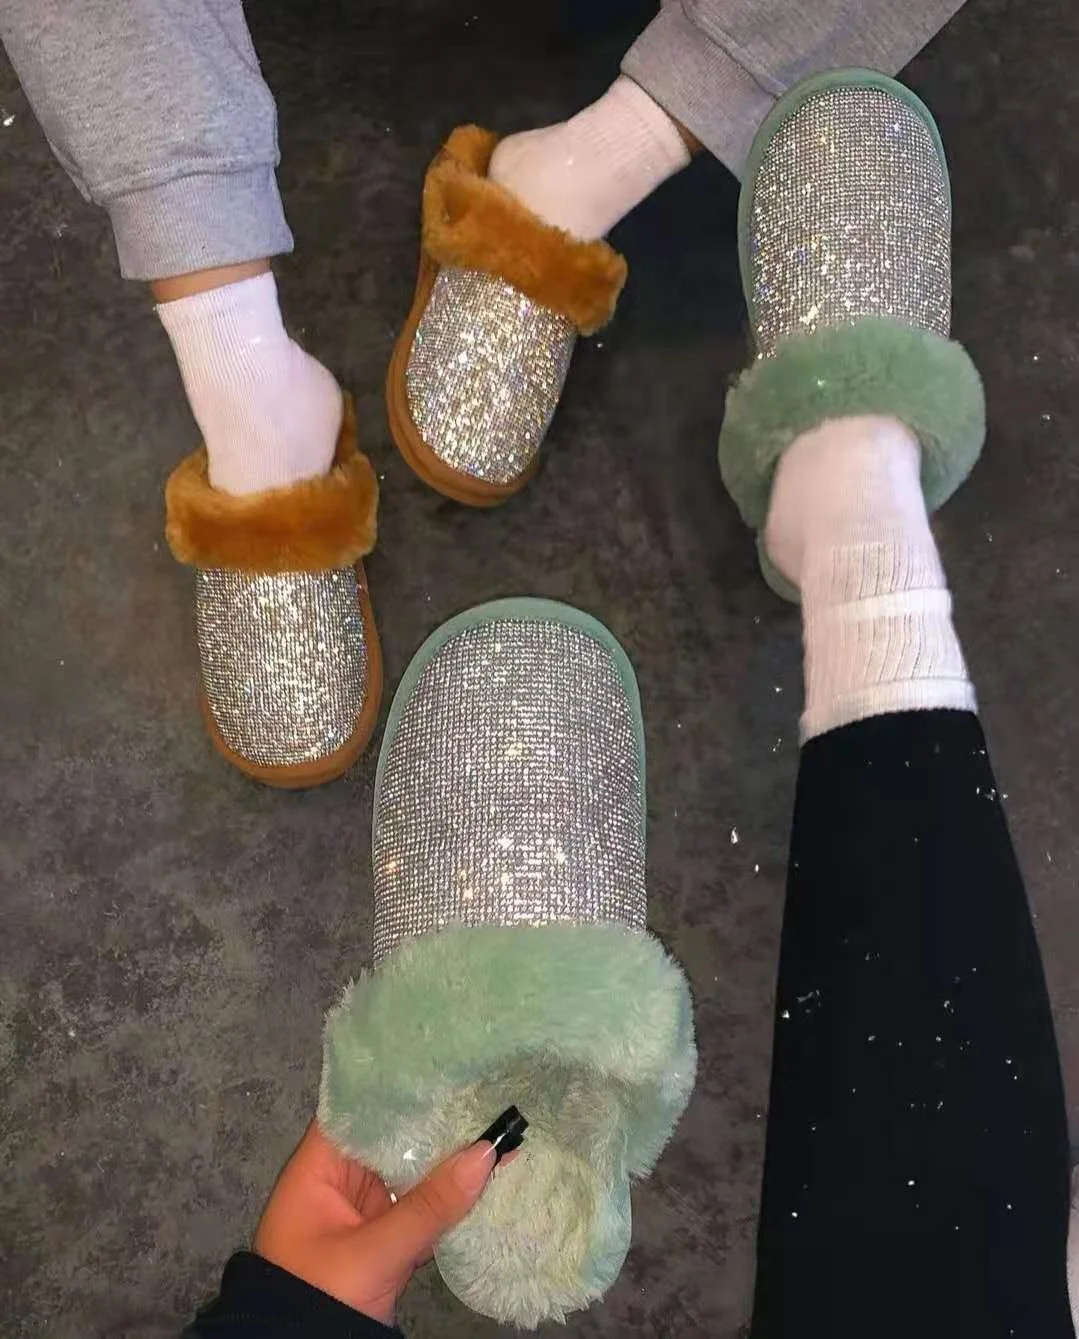 

Winter Warm Fuzzy Fur Diamond Slippers Women Flat Furry Famous Brand Slides Fashion Female Fluffy Sandals for Ladies, As picture show